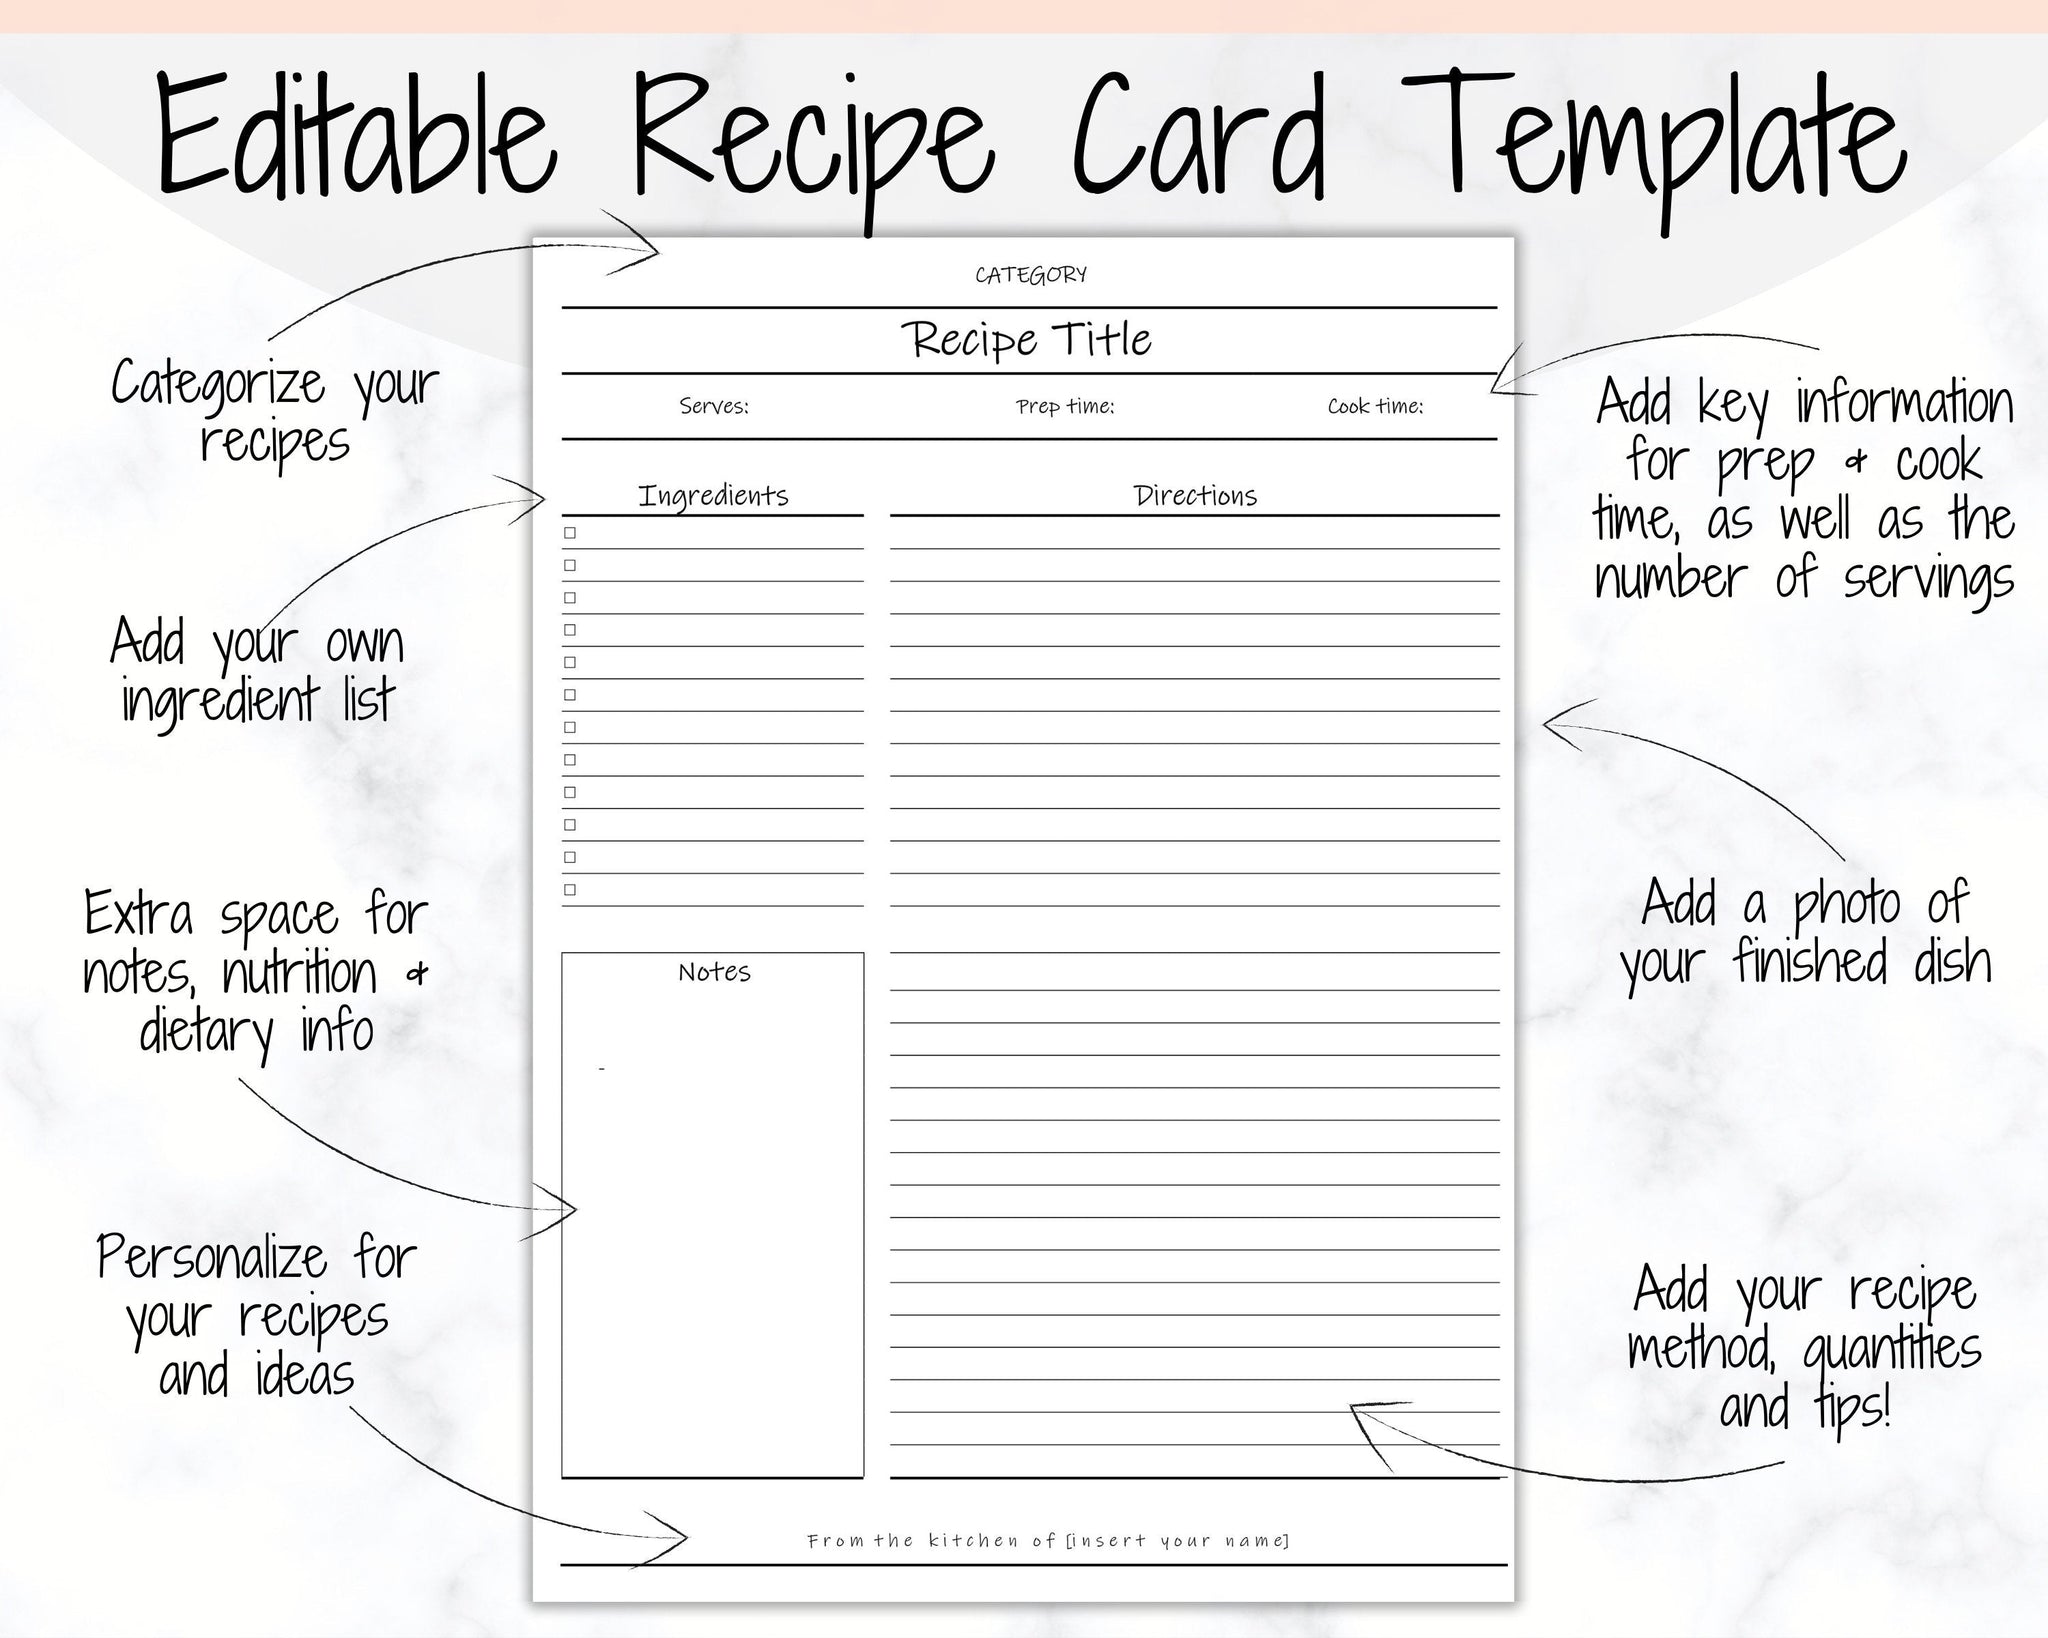 Recipe Sheet Printable Recipe Page Template Blank (Instant